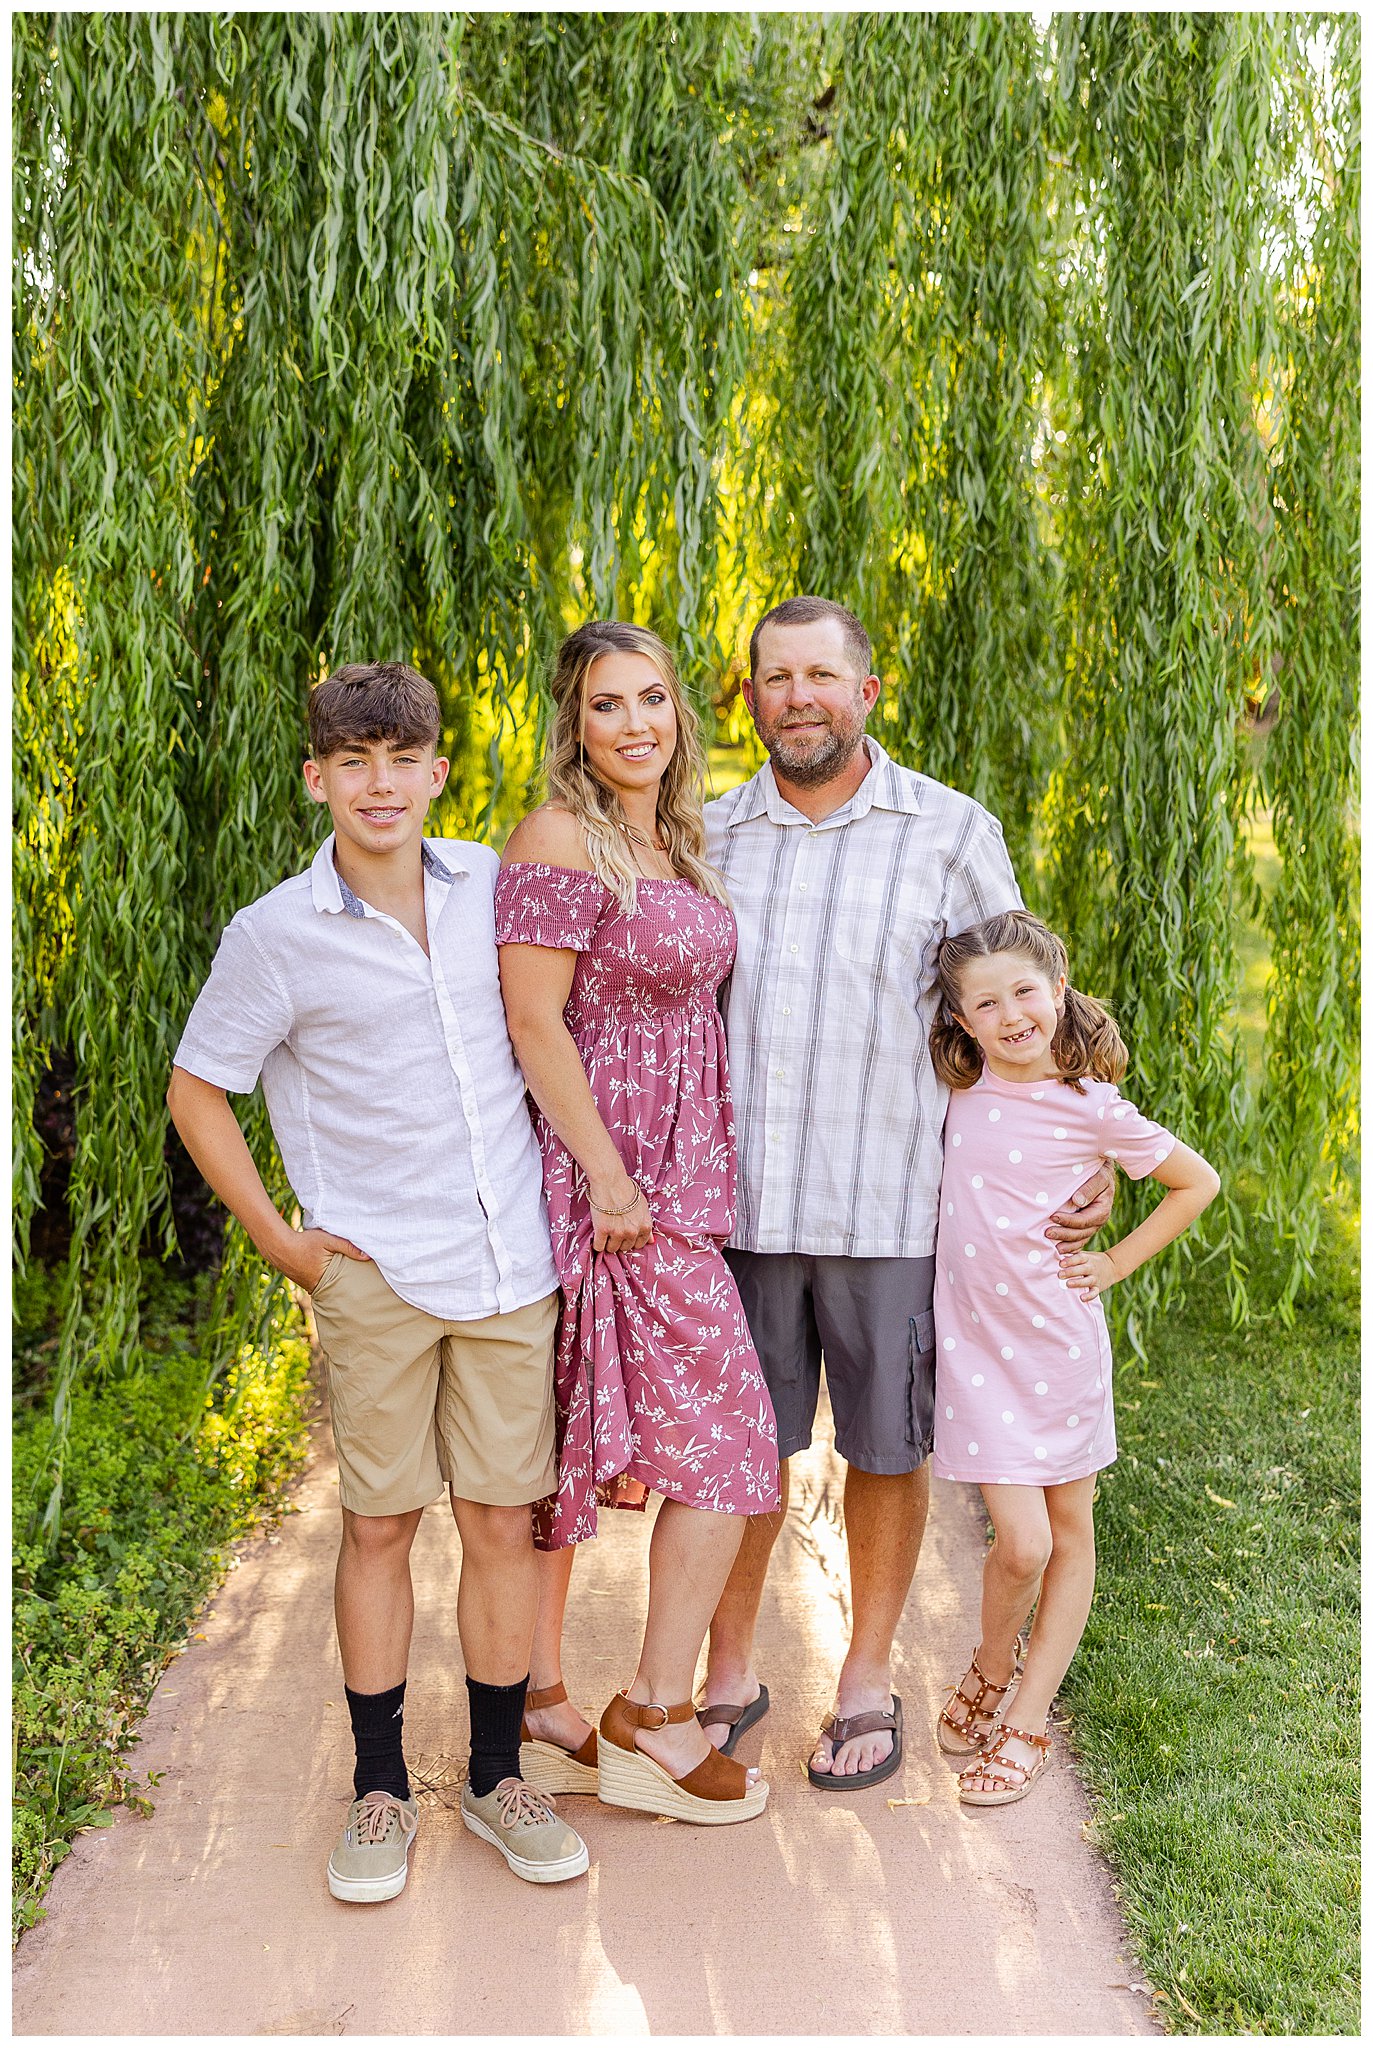 Family Session at White Ranch Events with Willow Tree | Lauren + Colby